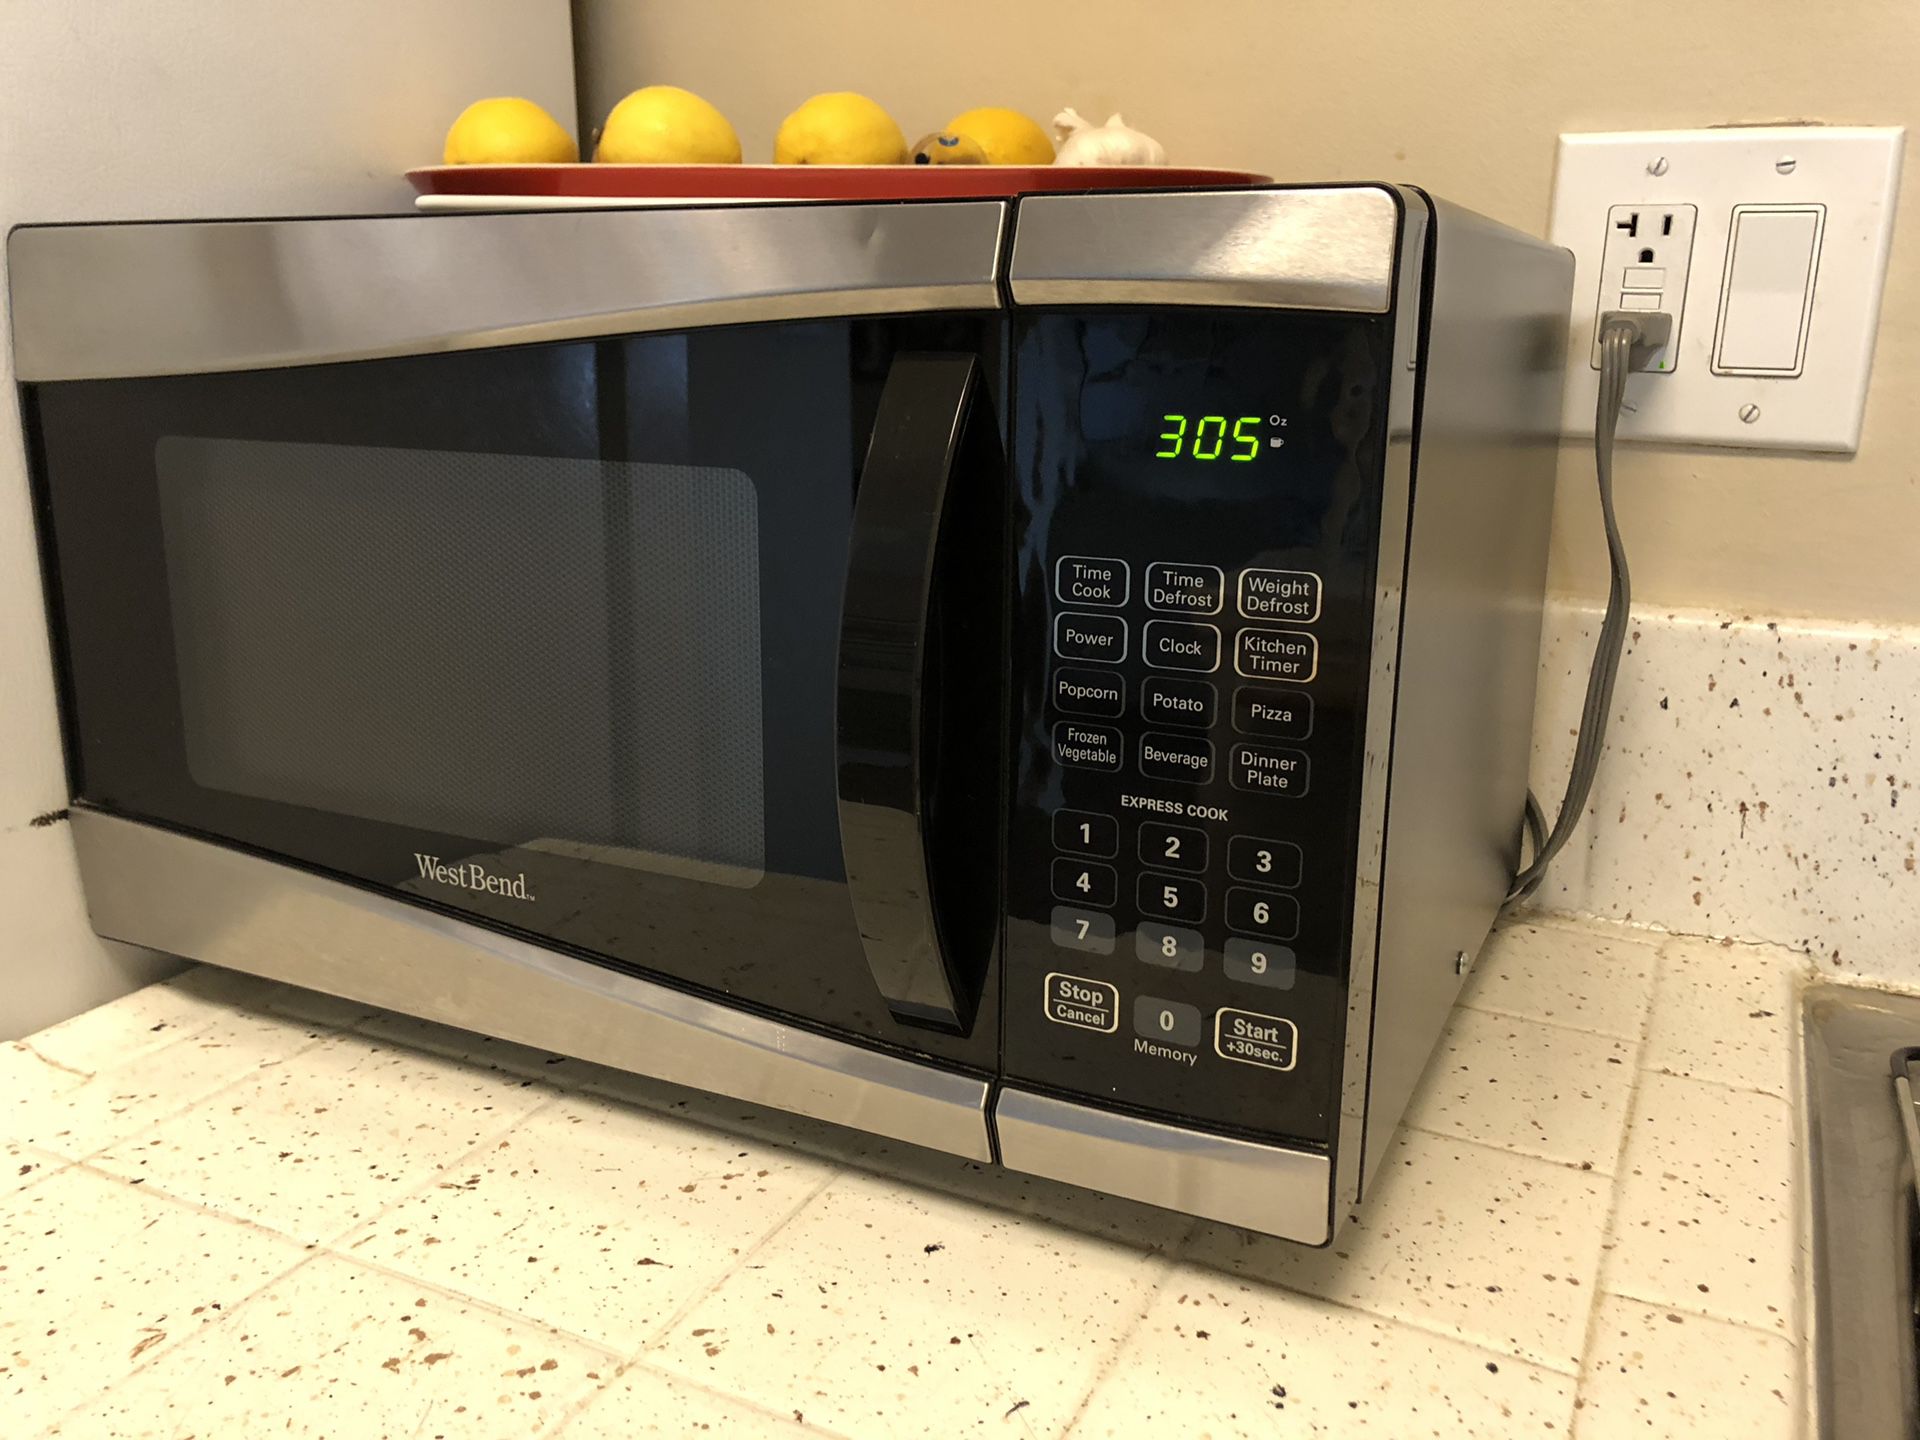 West bend microwave works great $40 OBO